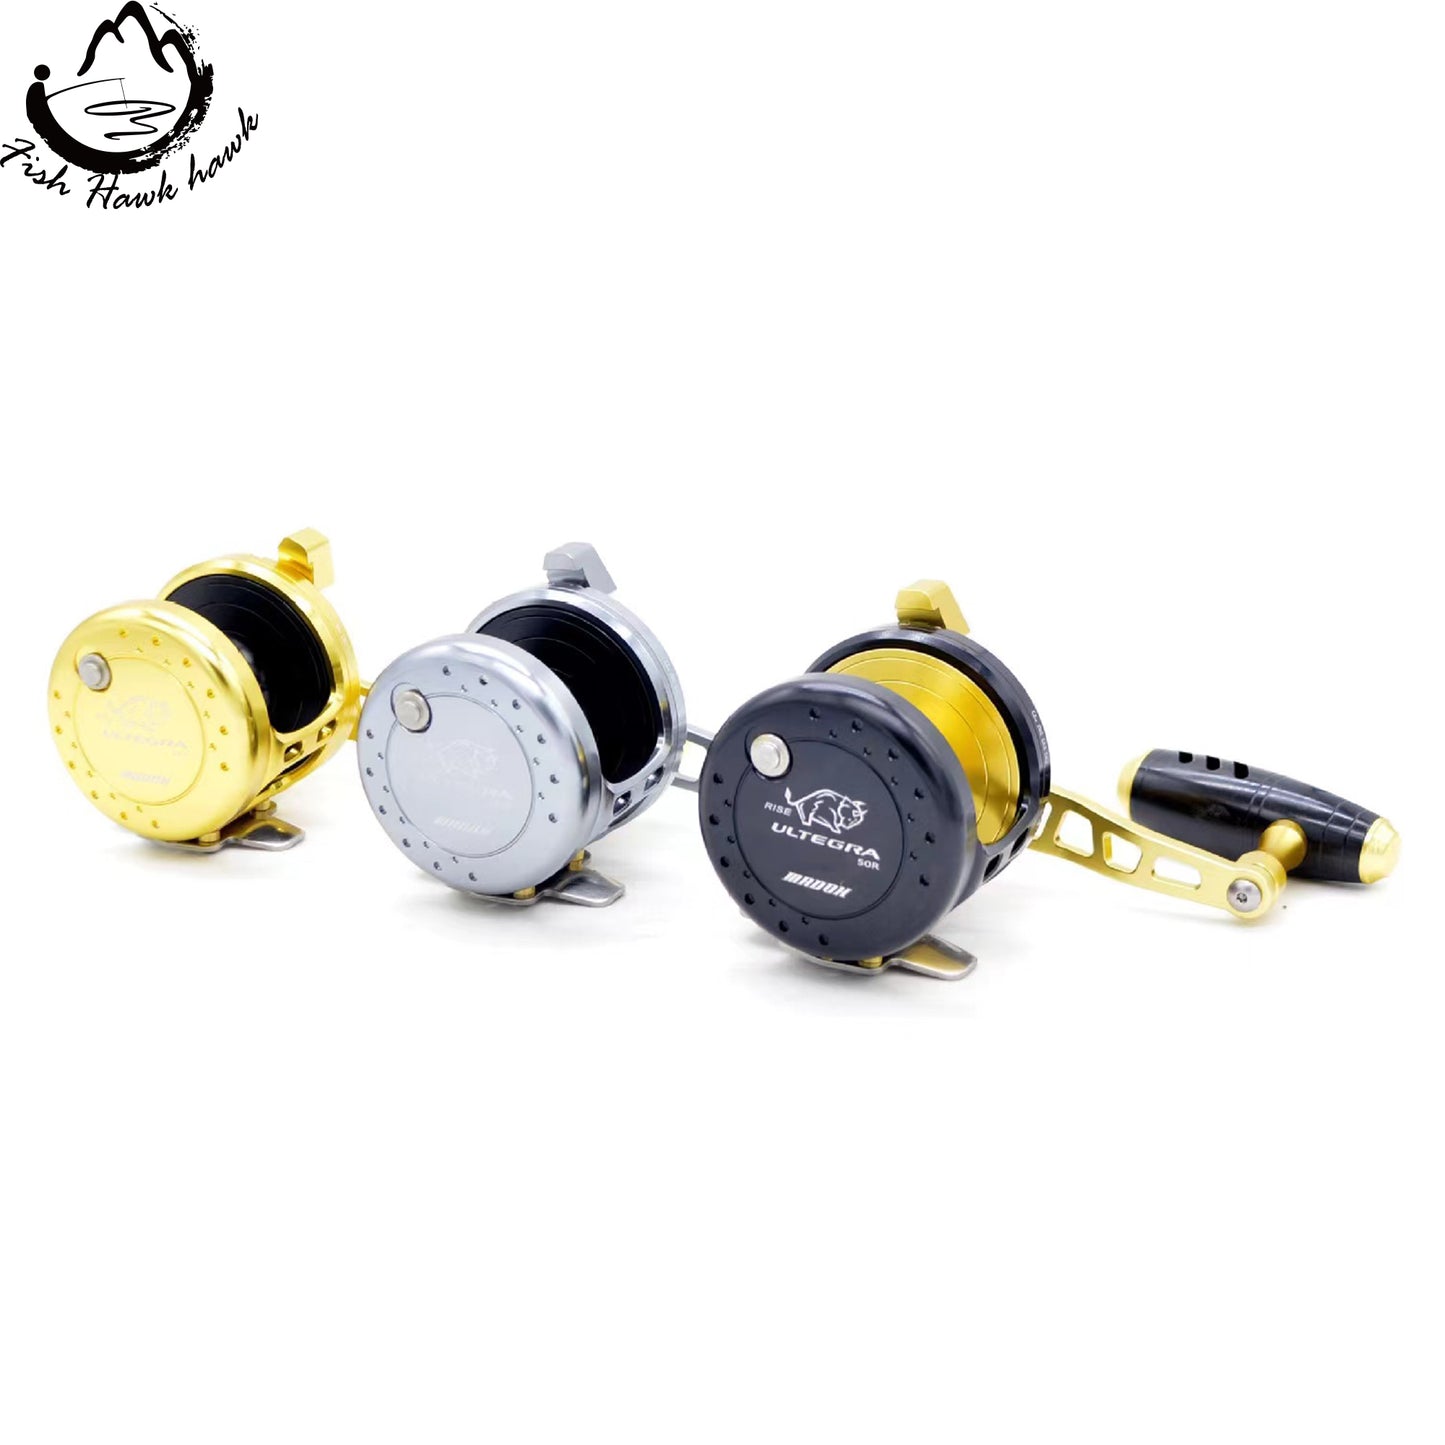 “Golden Bull” Slow Pitch Jigging Reel (left and right hand)